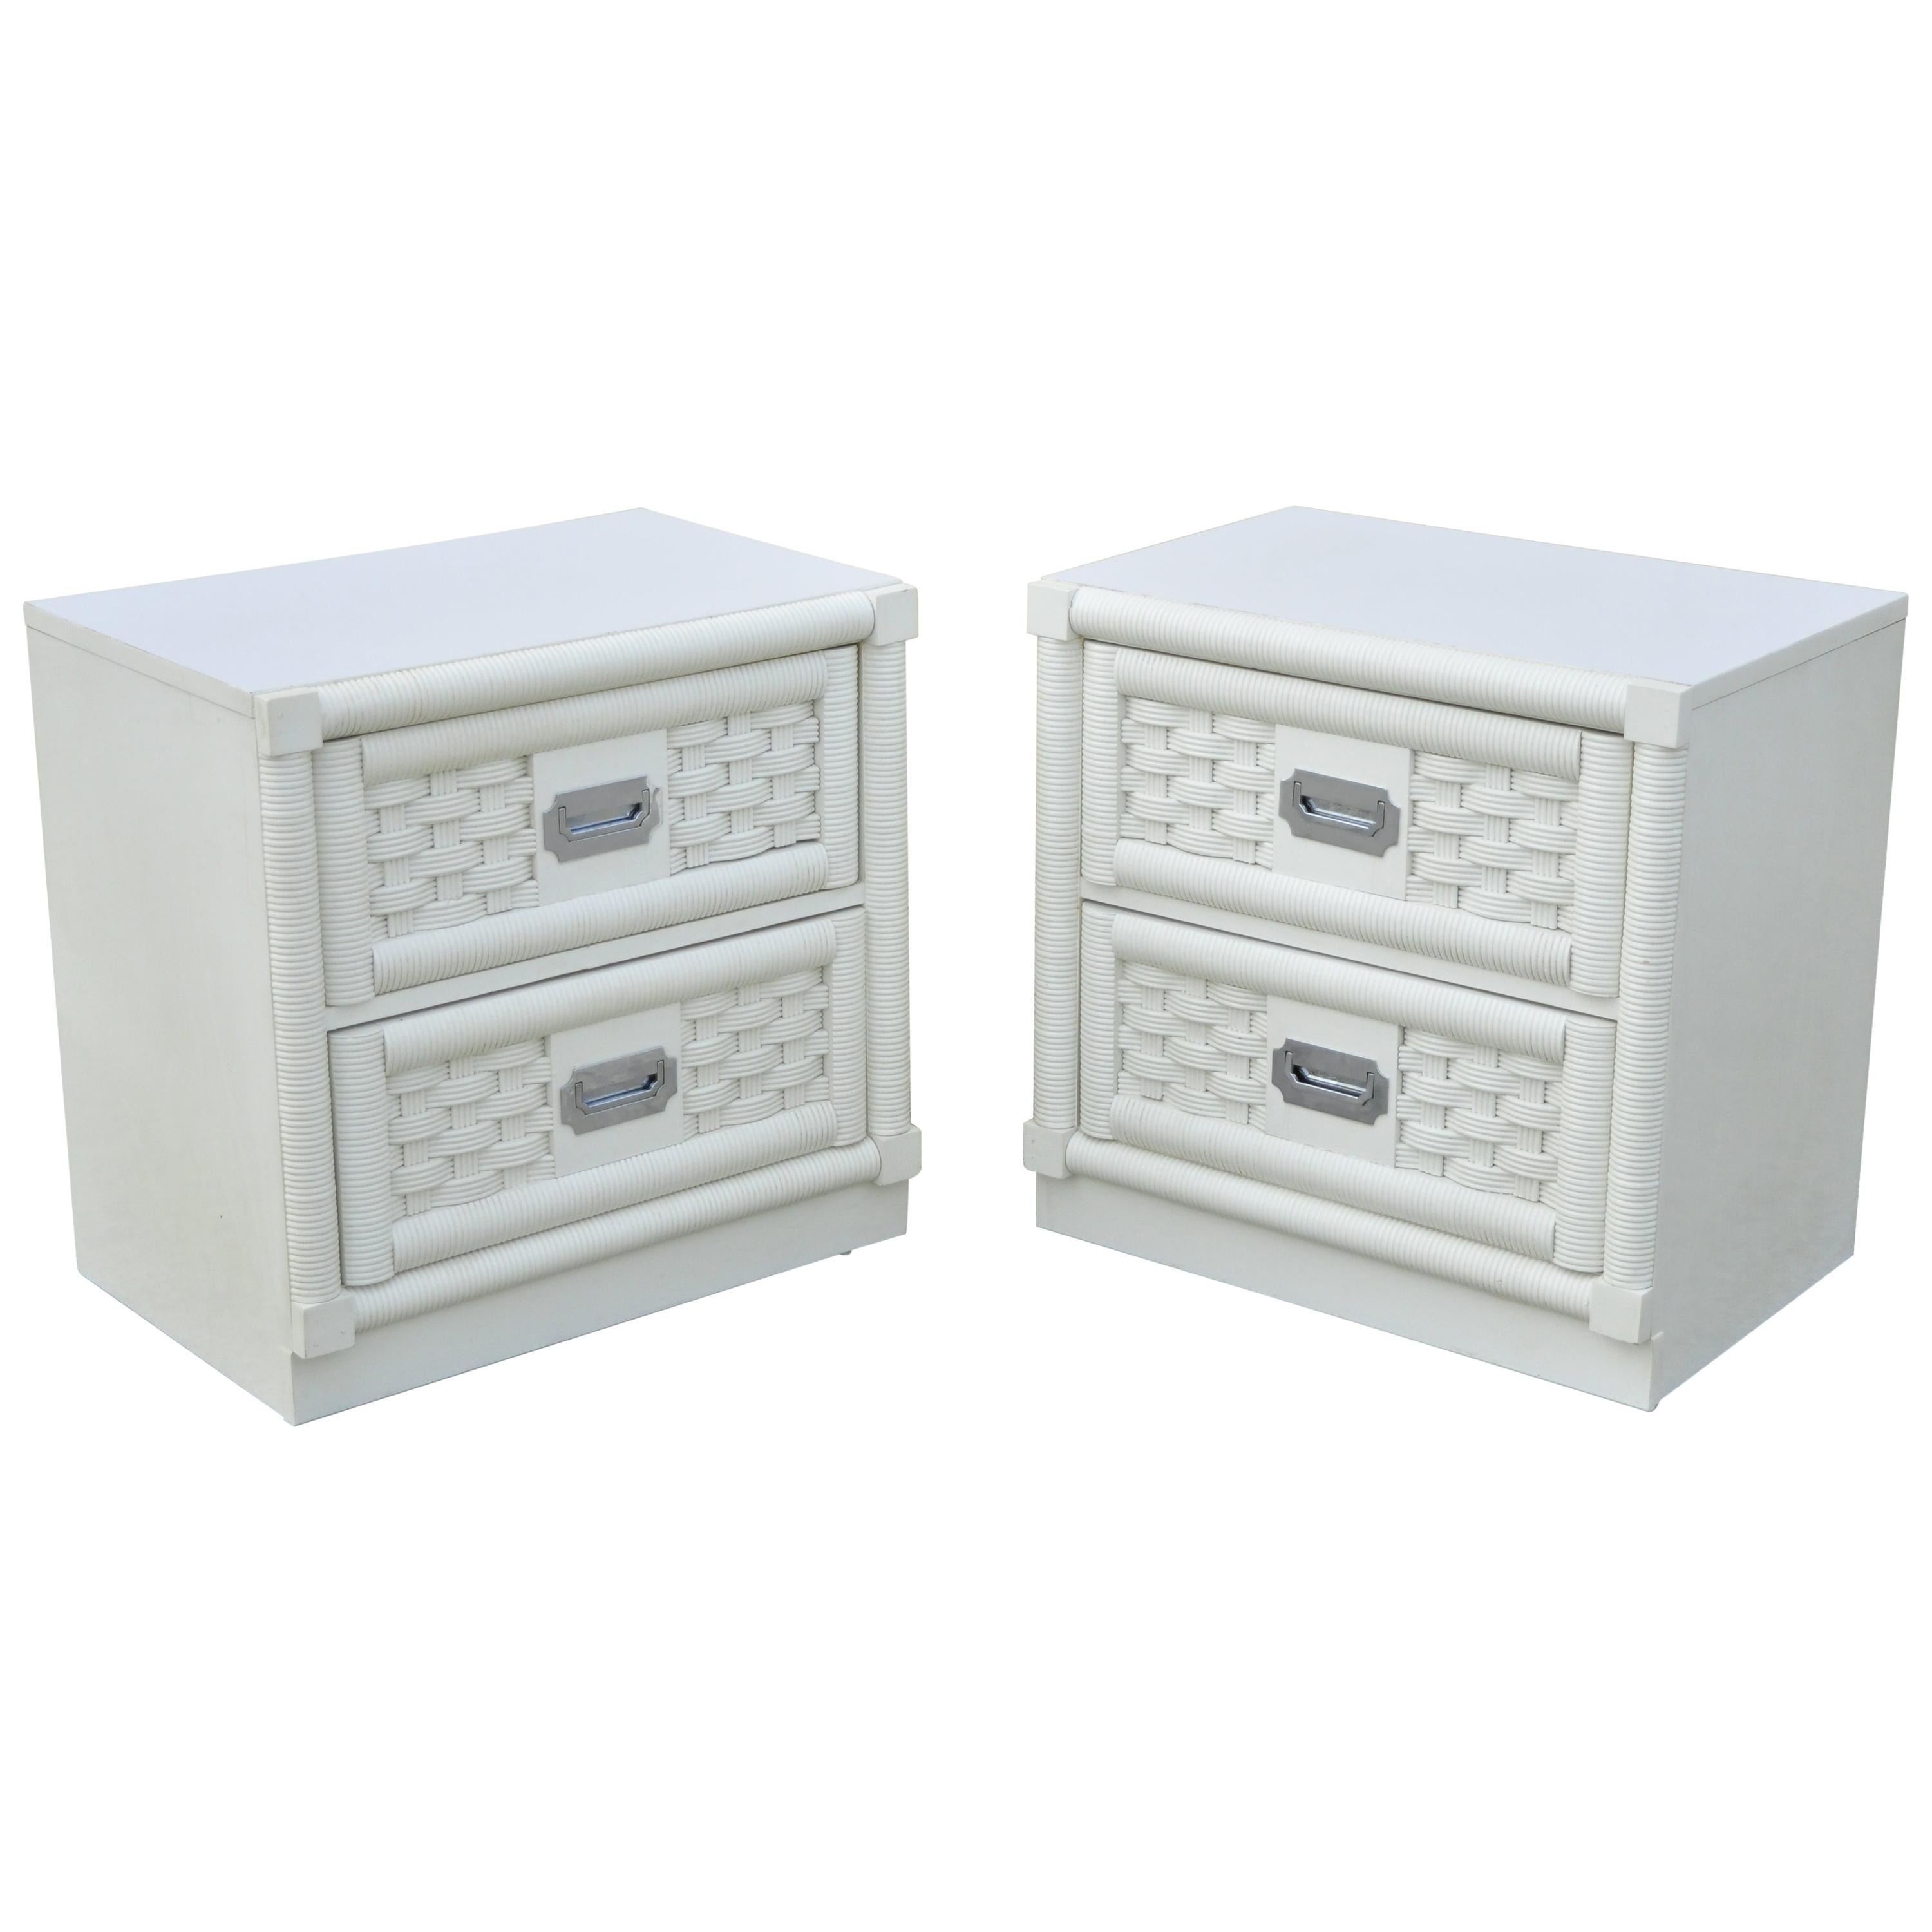 Dixie Cane Rattan Campaign Style White Hollywood Regency Nightstands - a Pair